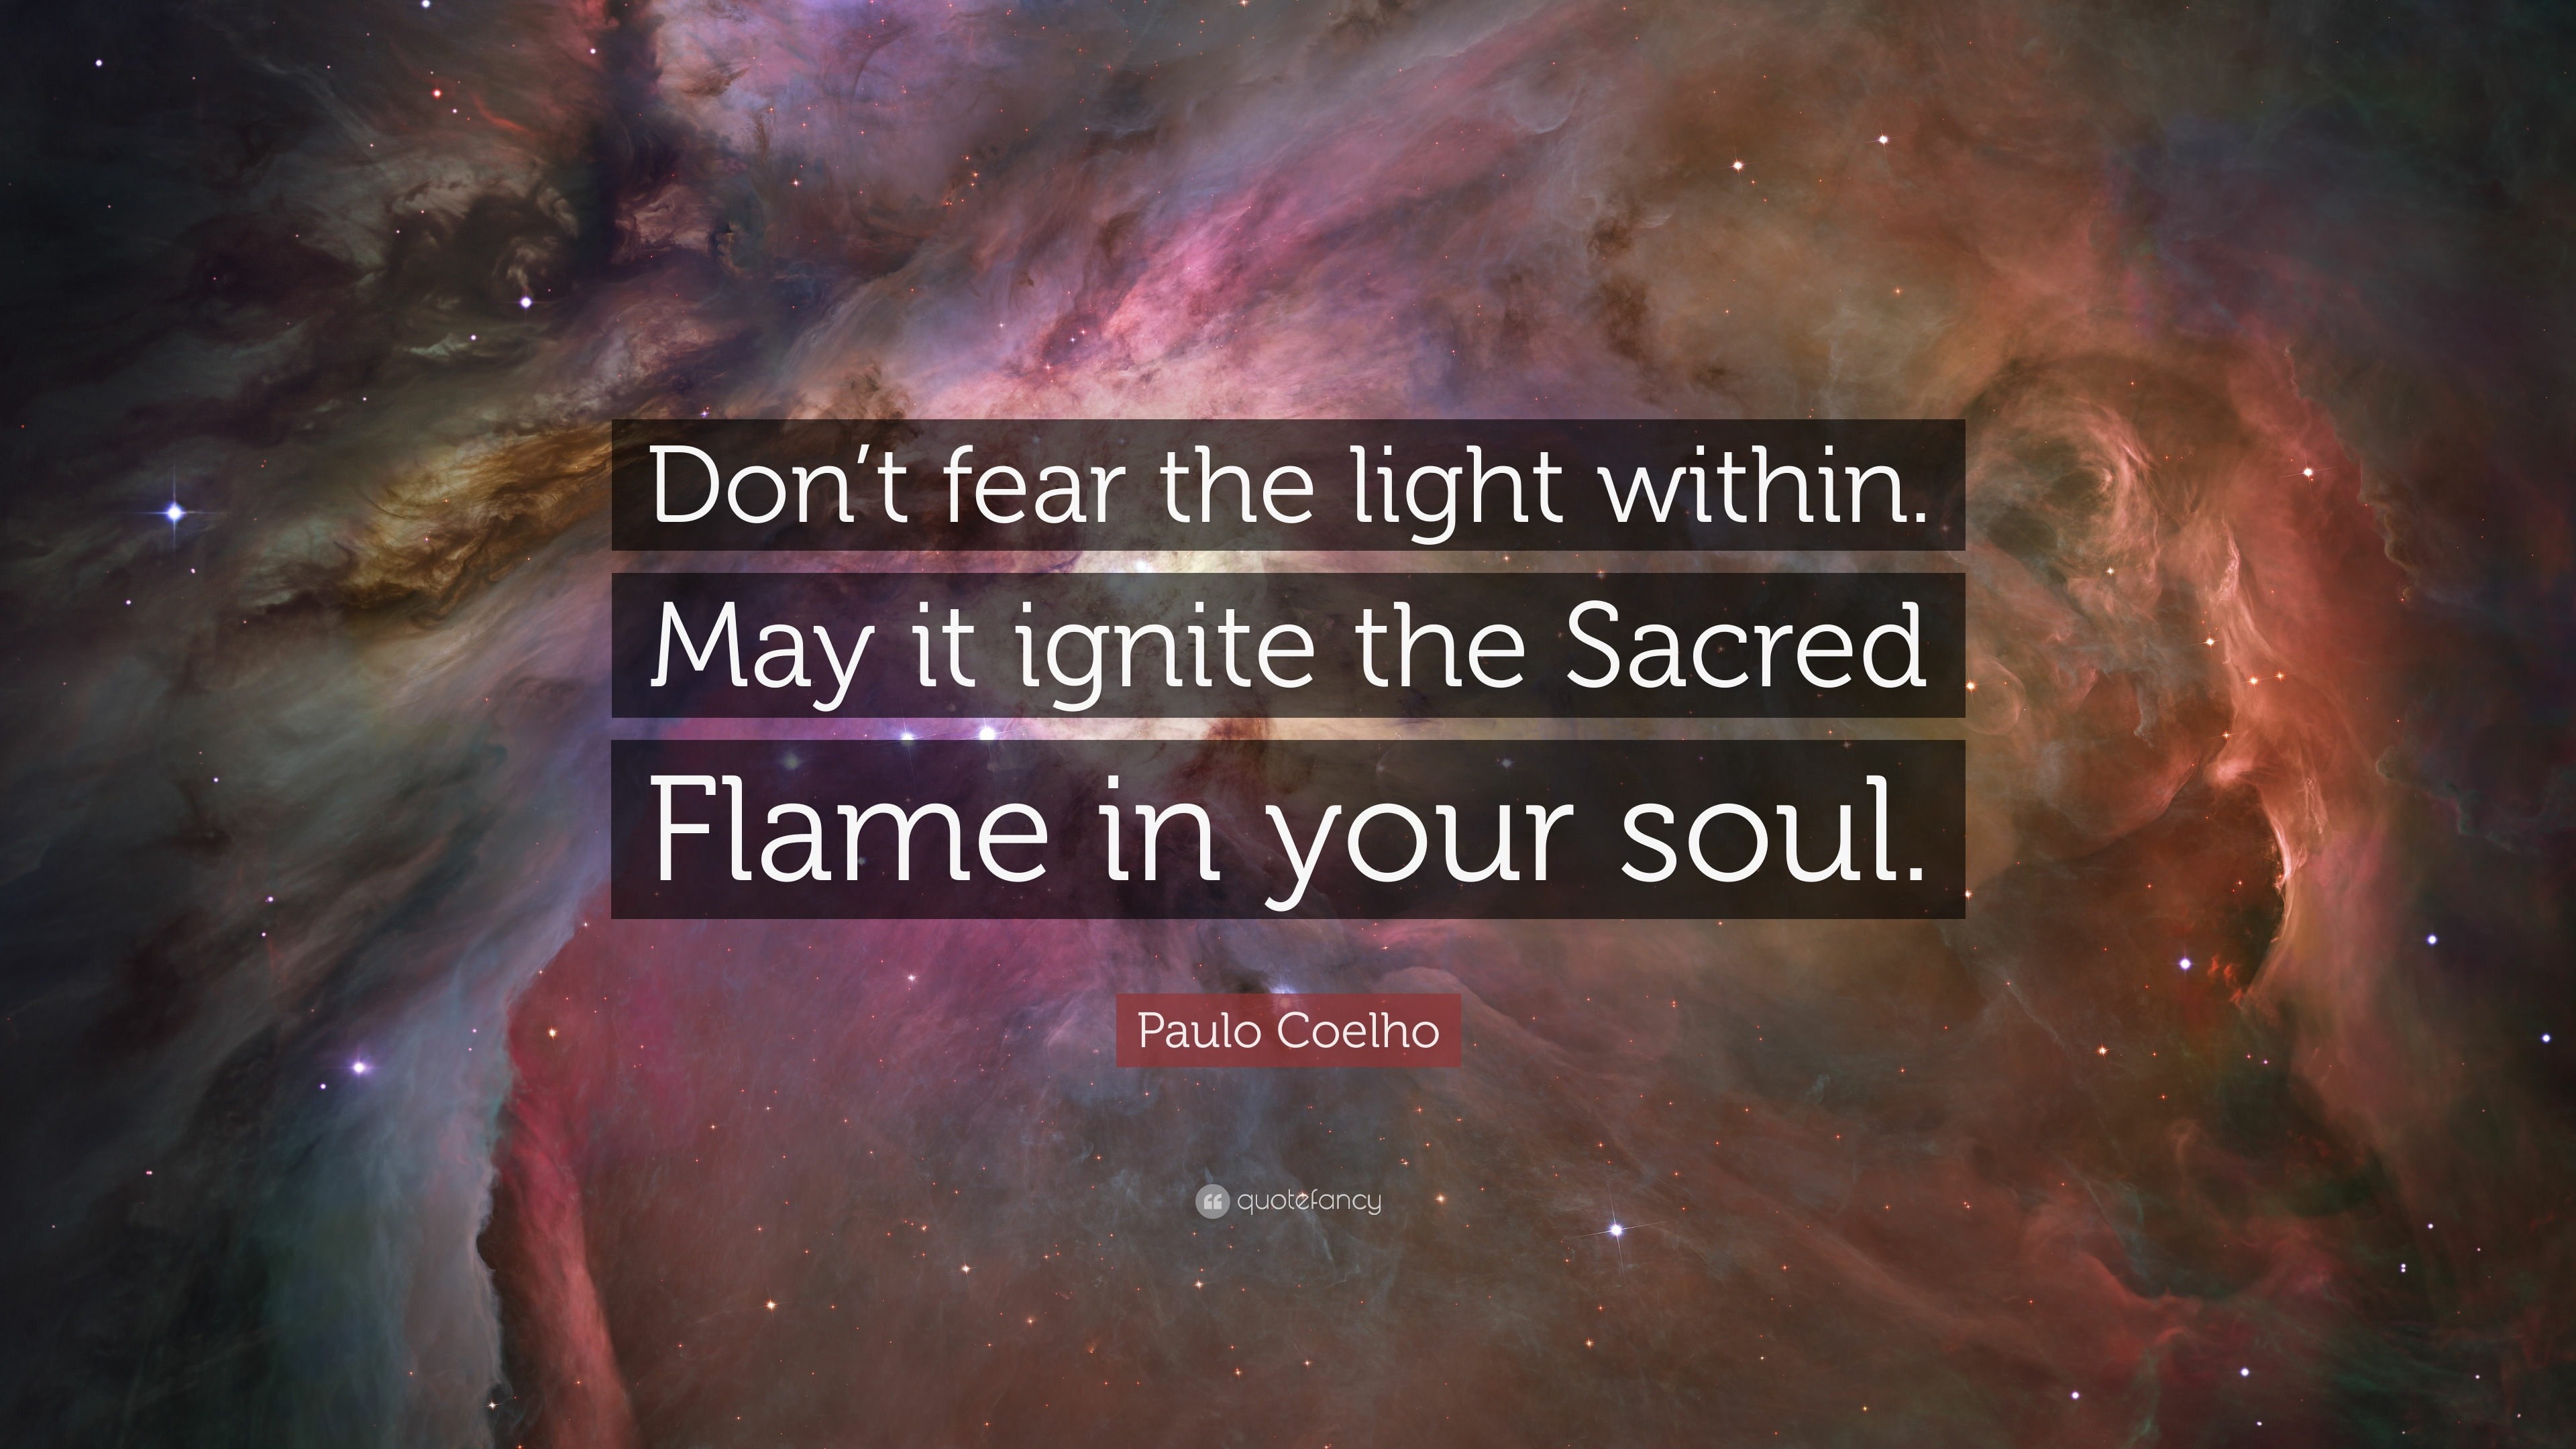 oprejst tælle forurening Paulo Coelho Quote: “Don't fear the light within. May it ignite the Sacred  Flame in